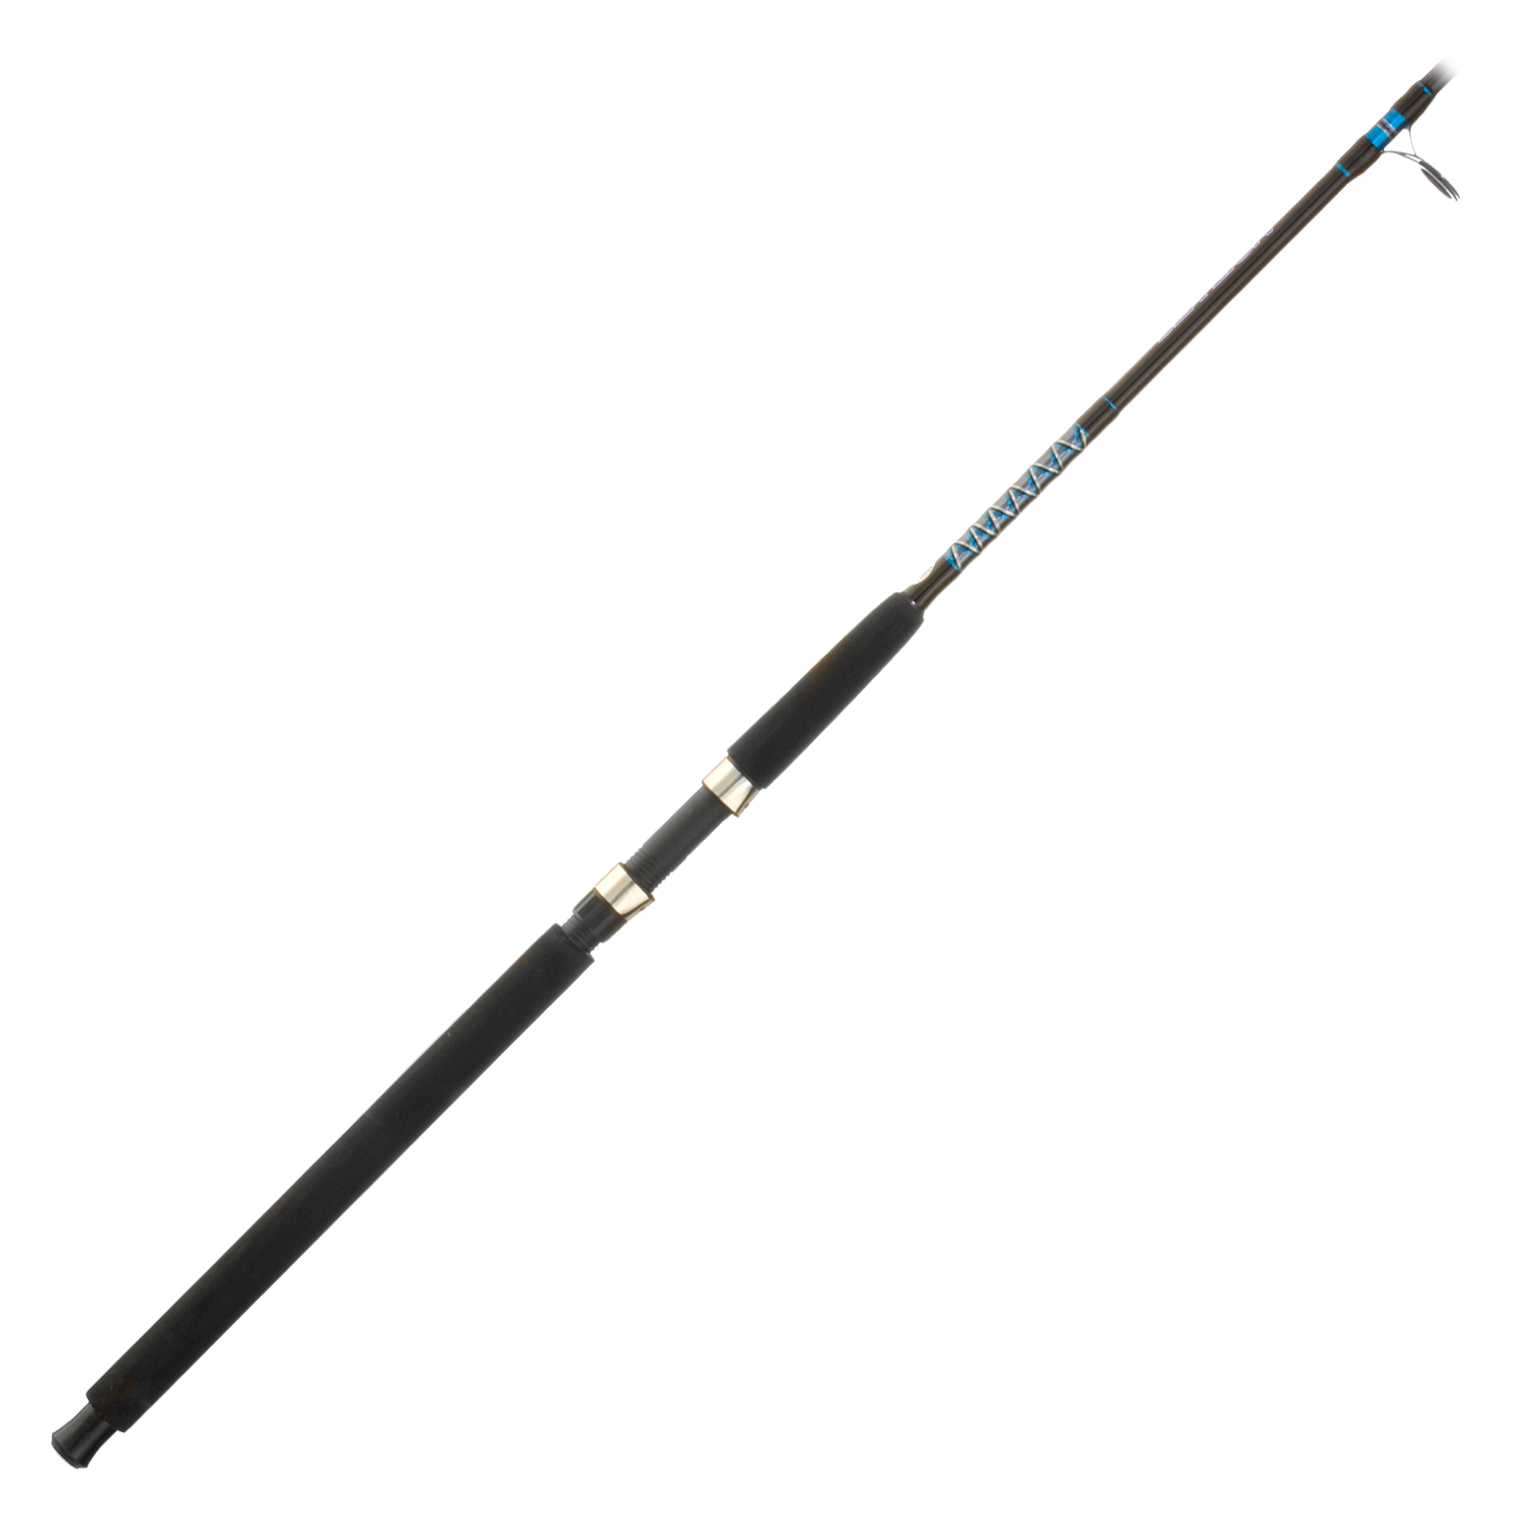 SLOW PITCH FISHING Rod SALE 110-240g.+ Offshore Built. *PROMO Free Reel  incl. $219.99 - PicClick